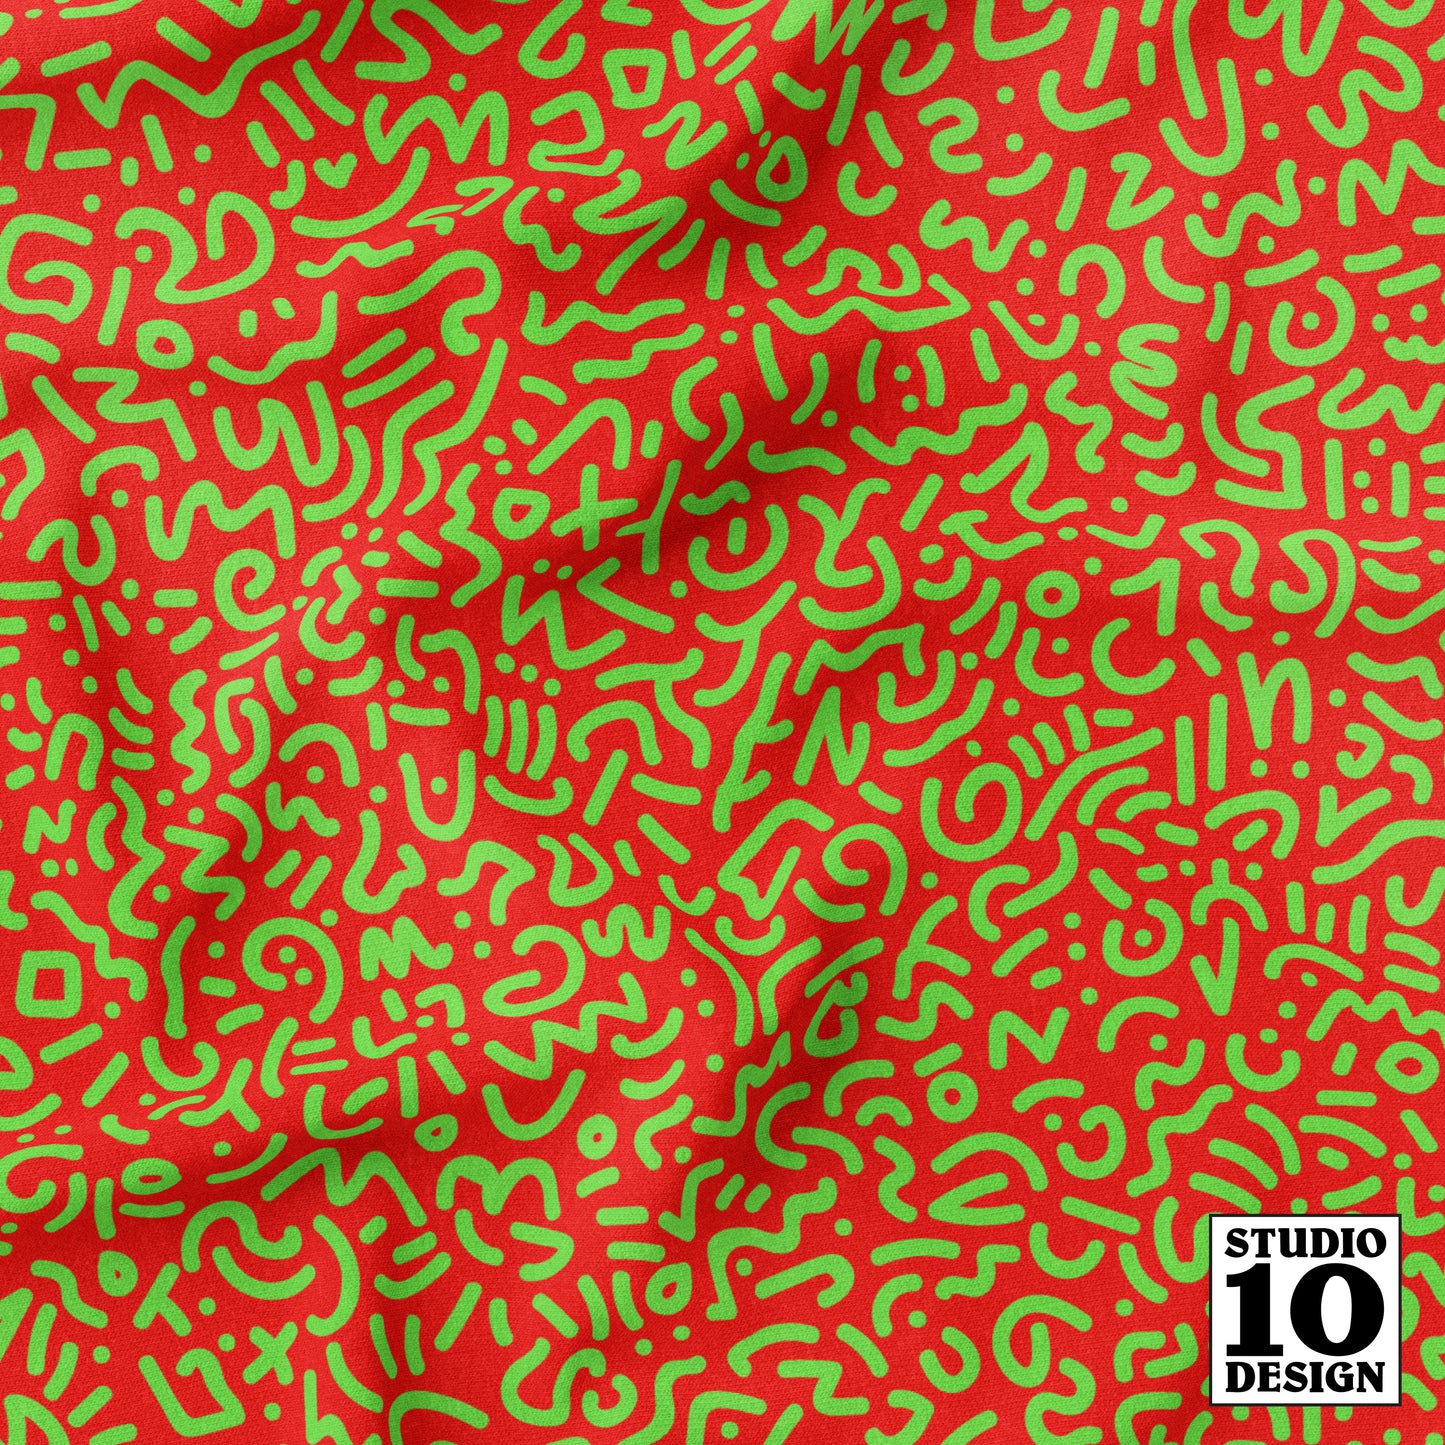 Doodle Green+Red Printed Fabric by Studio Ten Design